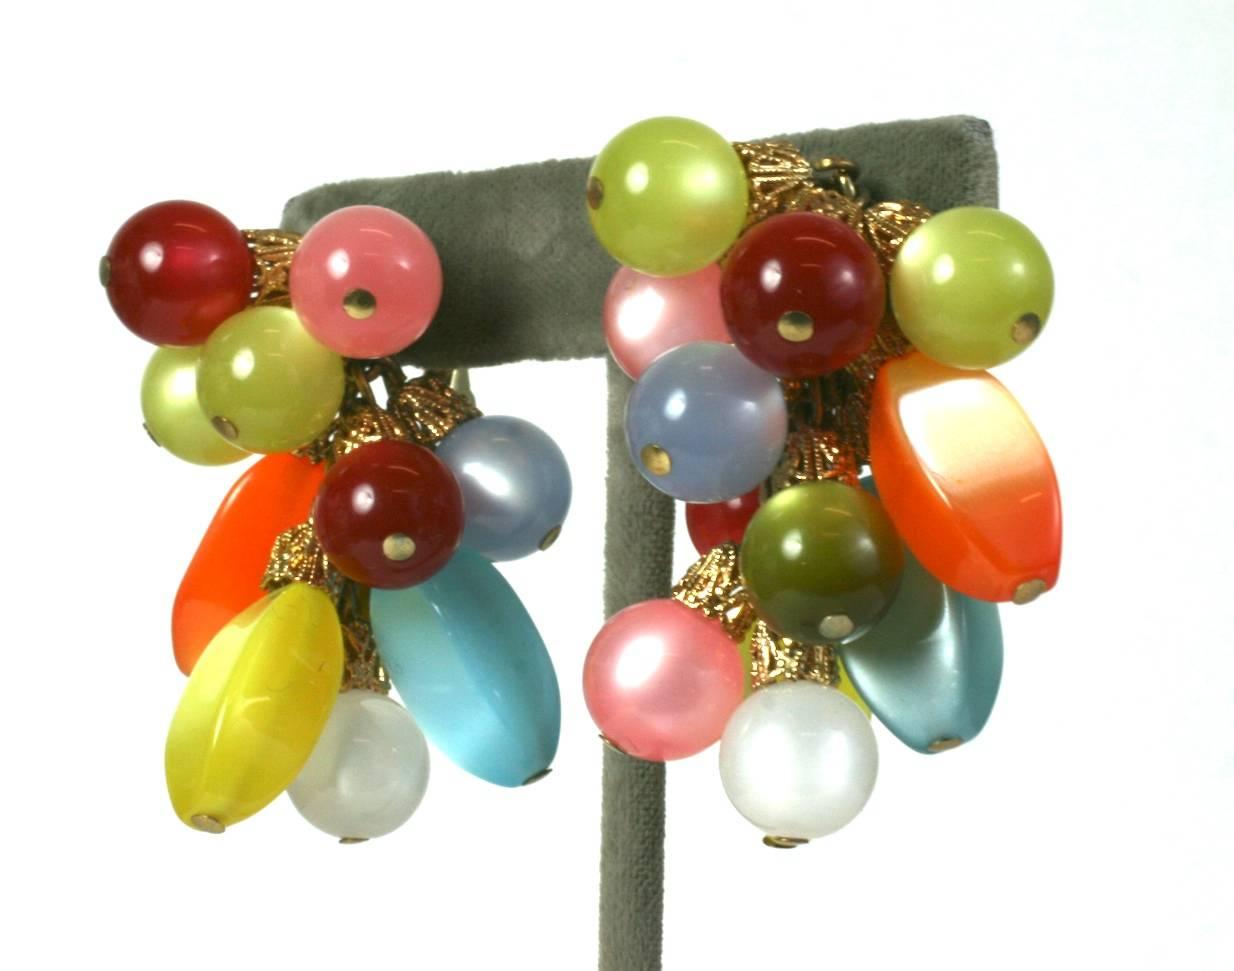 Napier Moon Glow Berry Cluster Ear Clips from the 1960's. Colorful beads of spun nylon give off a special reflection similar to cats eye stones. Clip back fittings.
Fun and striking pastel tones, with gilt filigree caps. 2